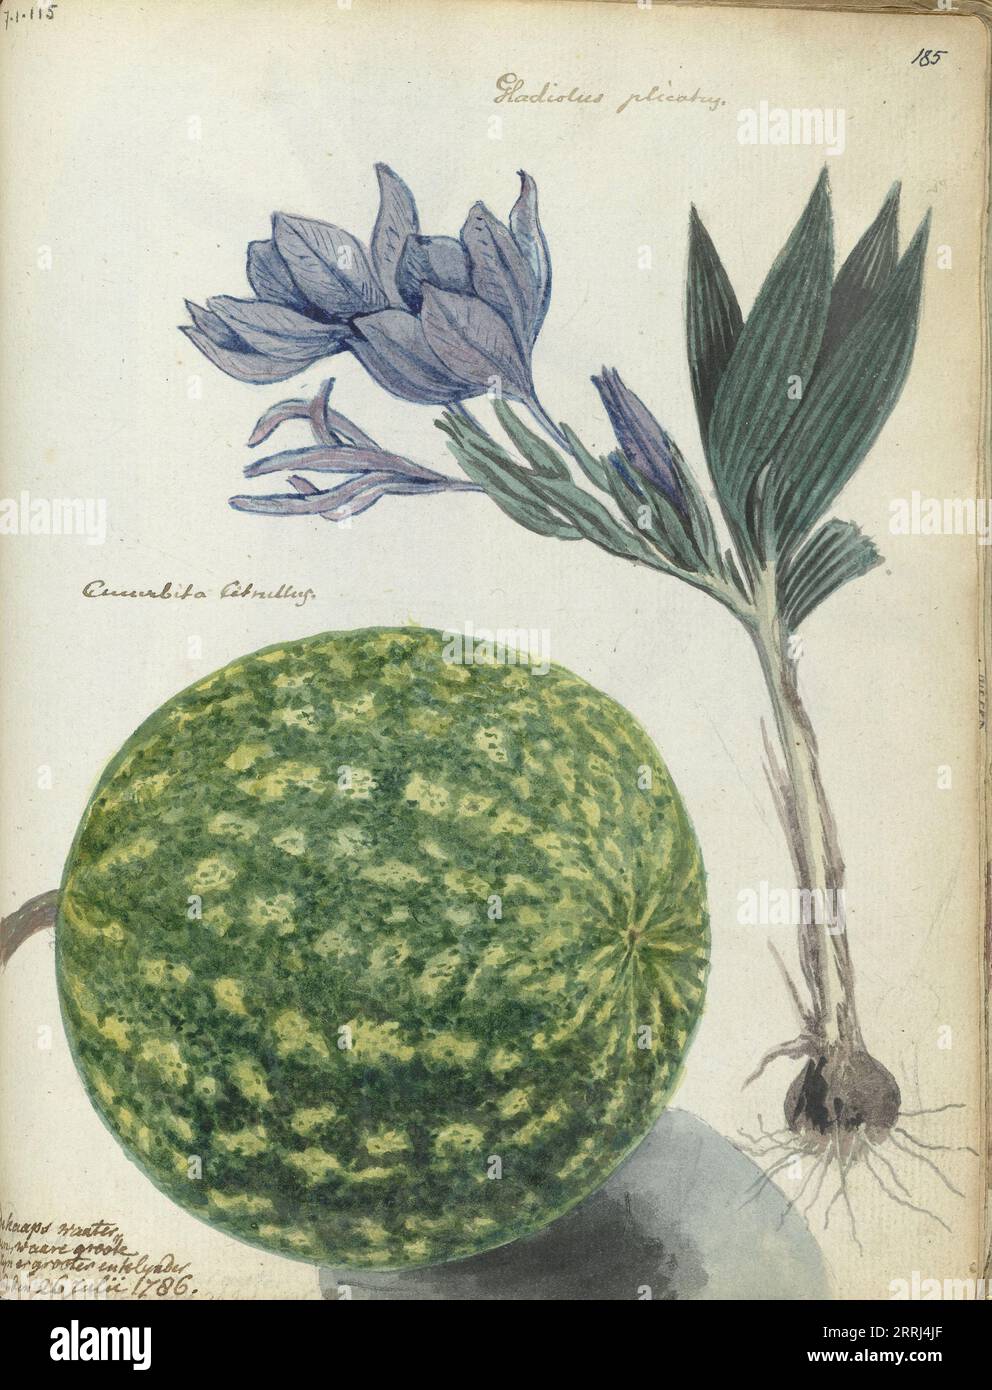 Cape watermelon and gladiolus, 1786. Gladiolus shown with bulb and roots. With inscription. Part of Jan Brandes' sketchbook, dl. 1 (1808), p. 185. Stock Photo